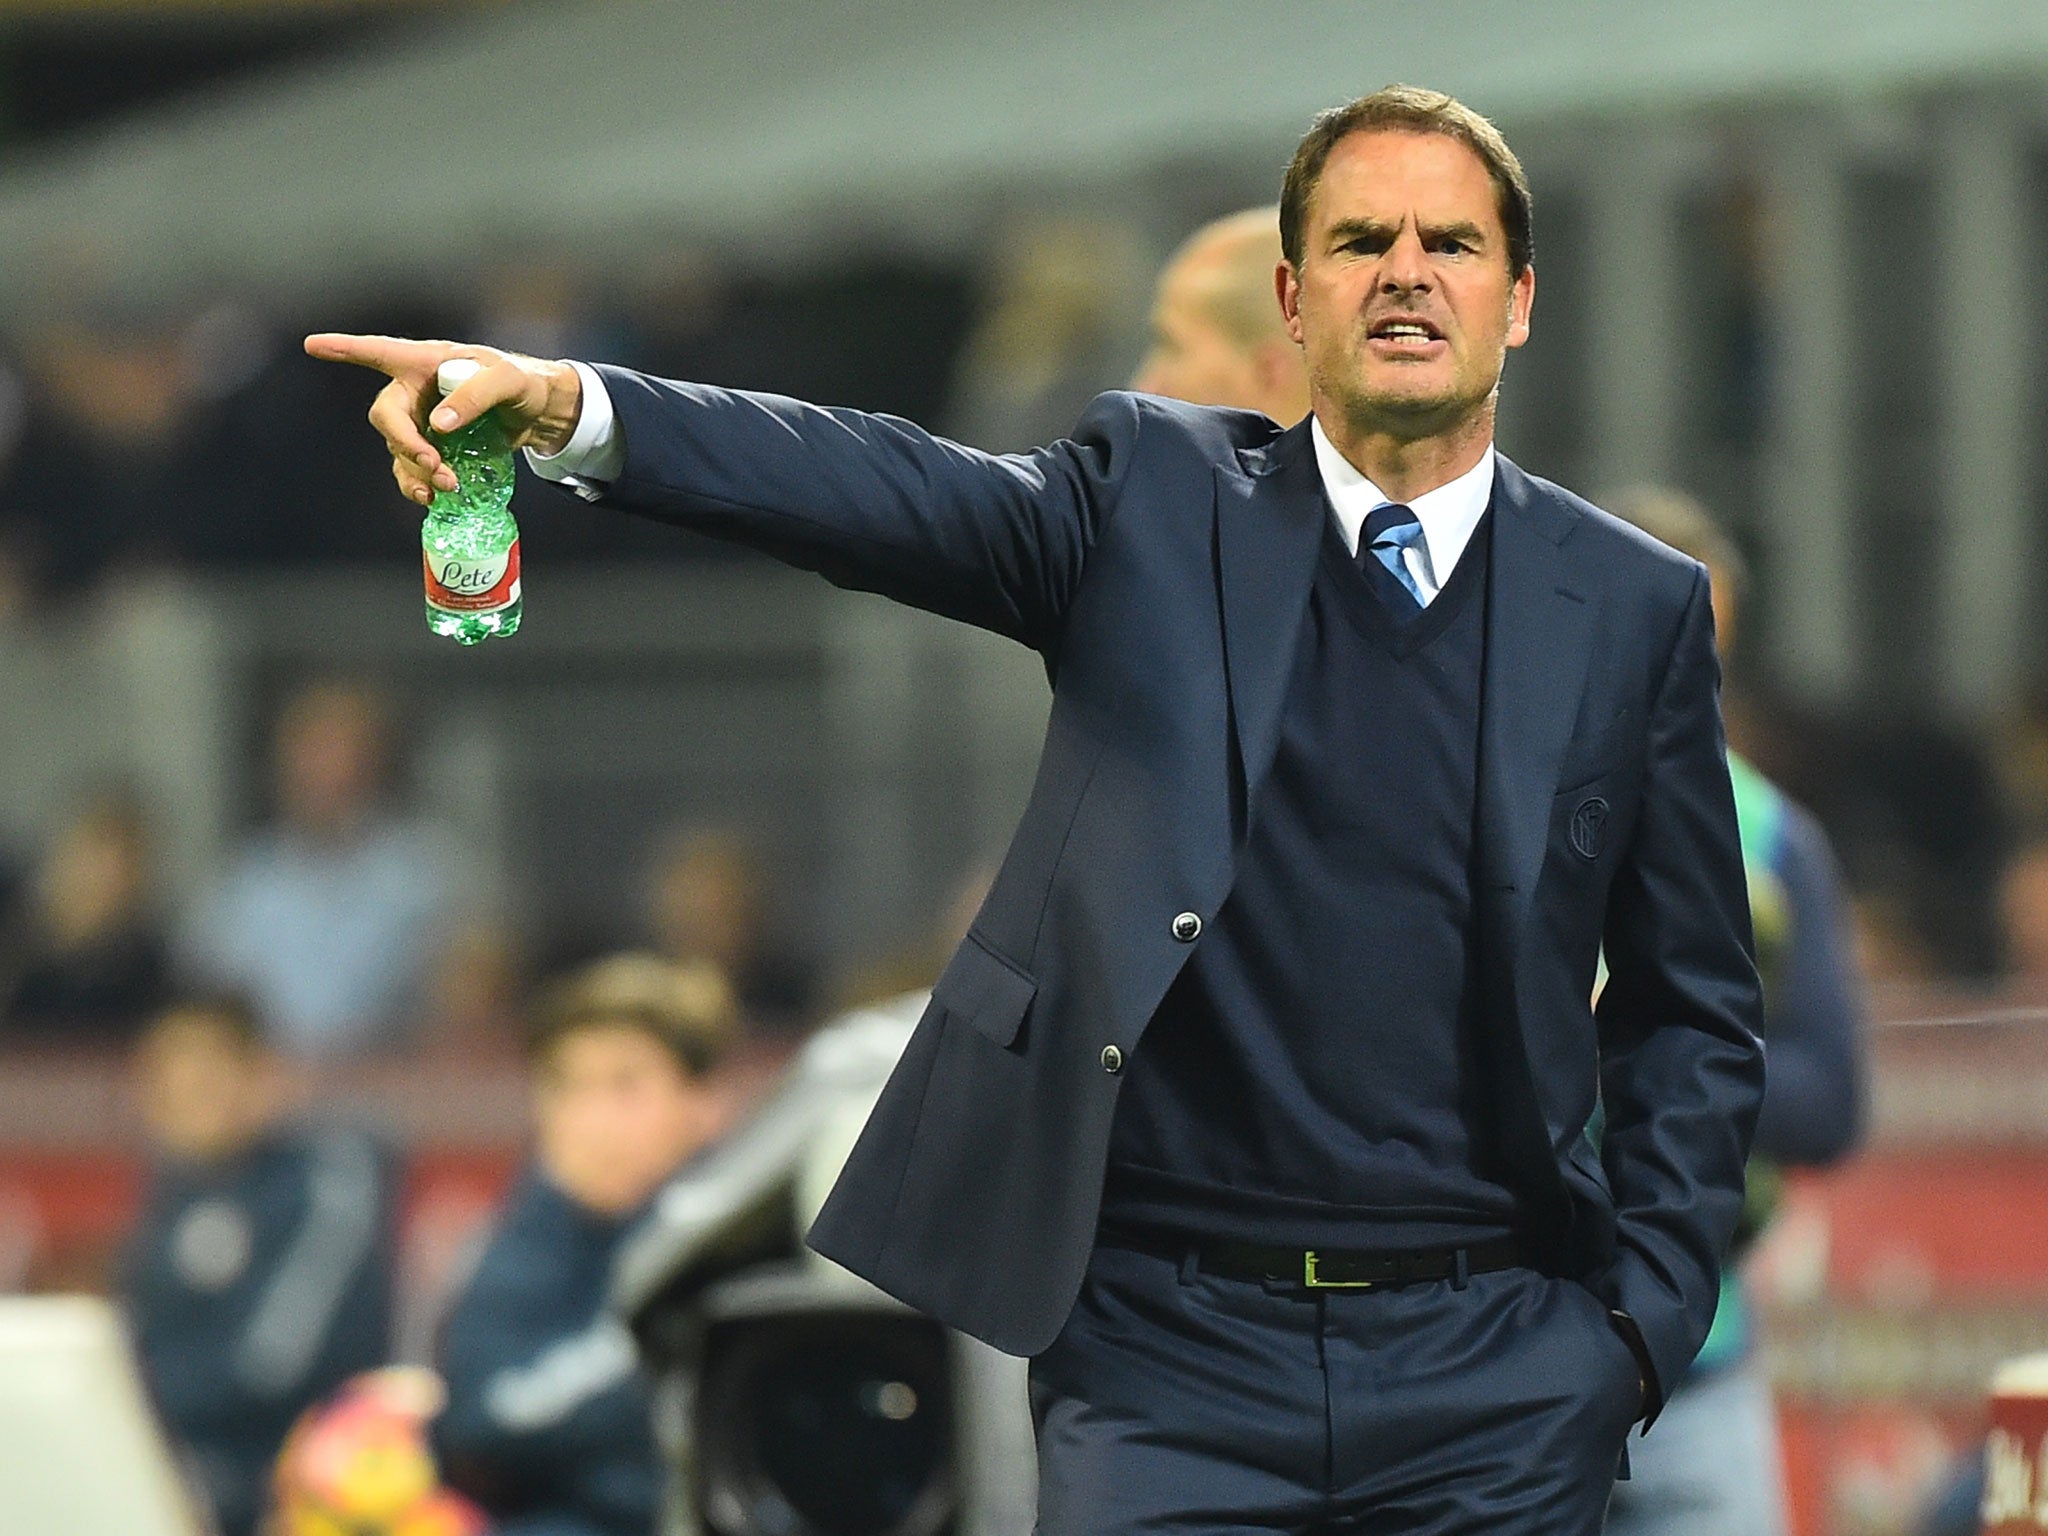 De Boer was sacked at Inter Milan before joining Palace (Getty )